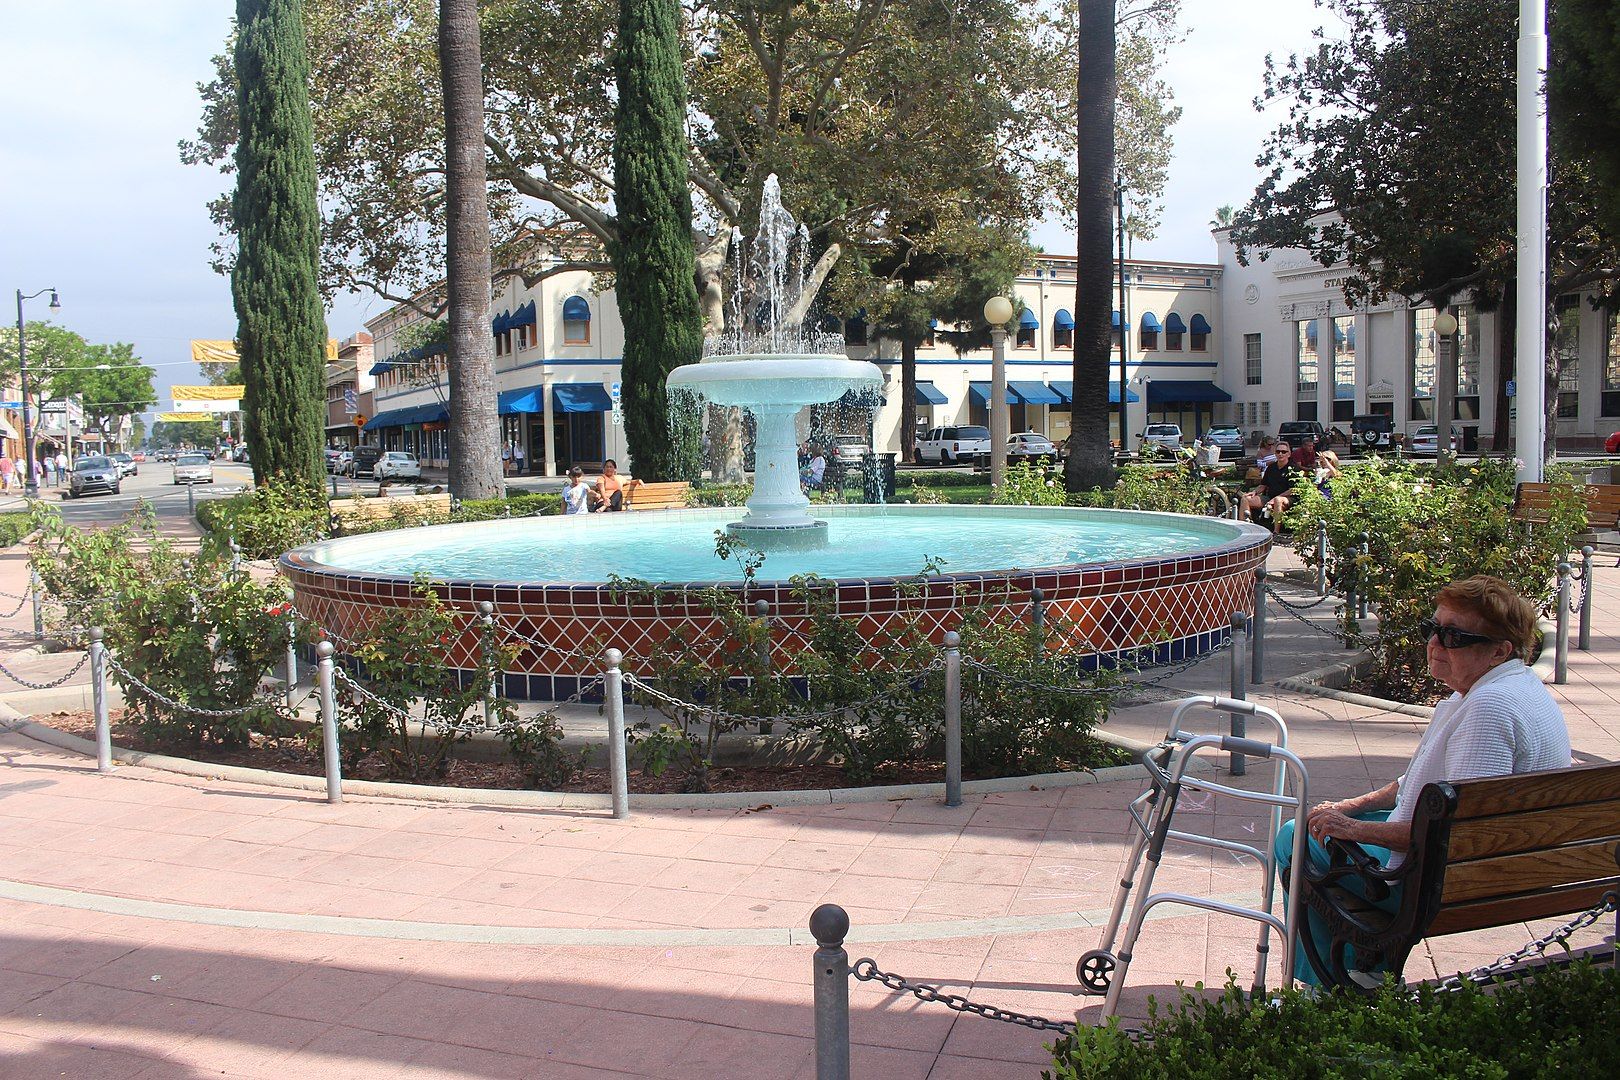 Old Towne in Orange, California get to know the Orange Historic District